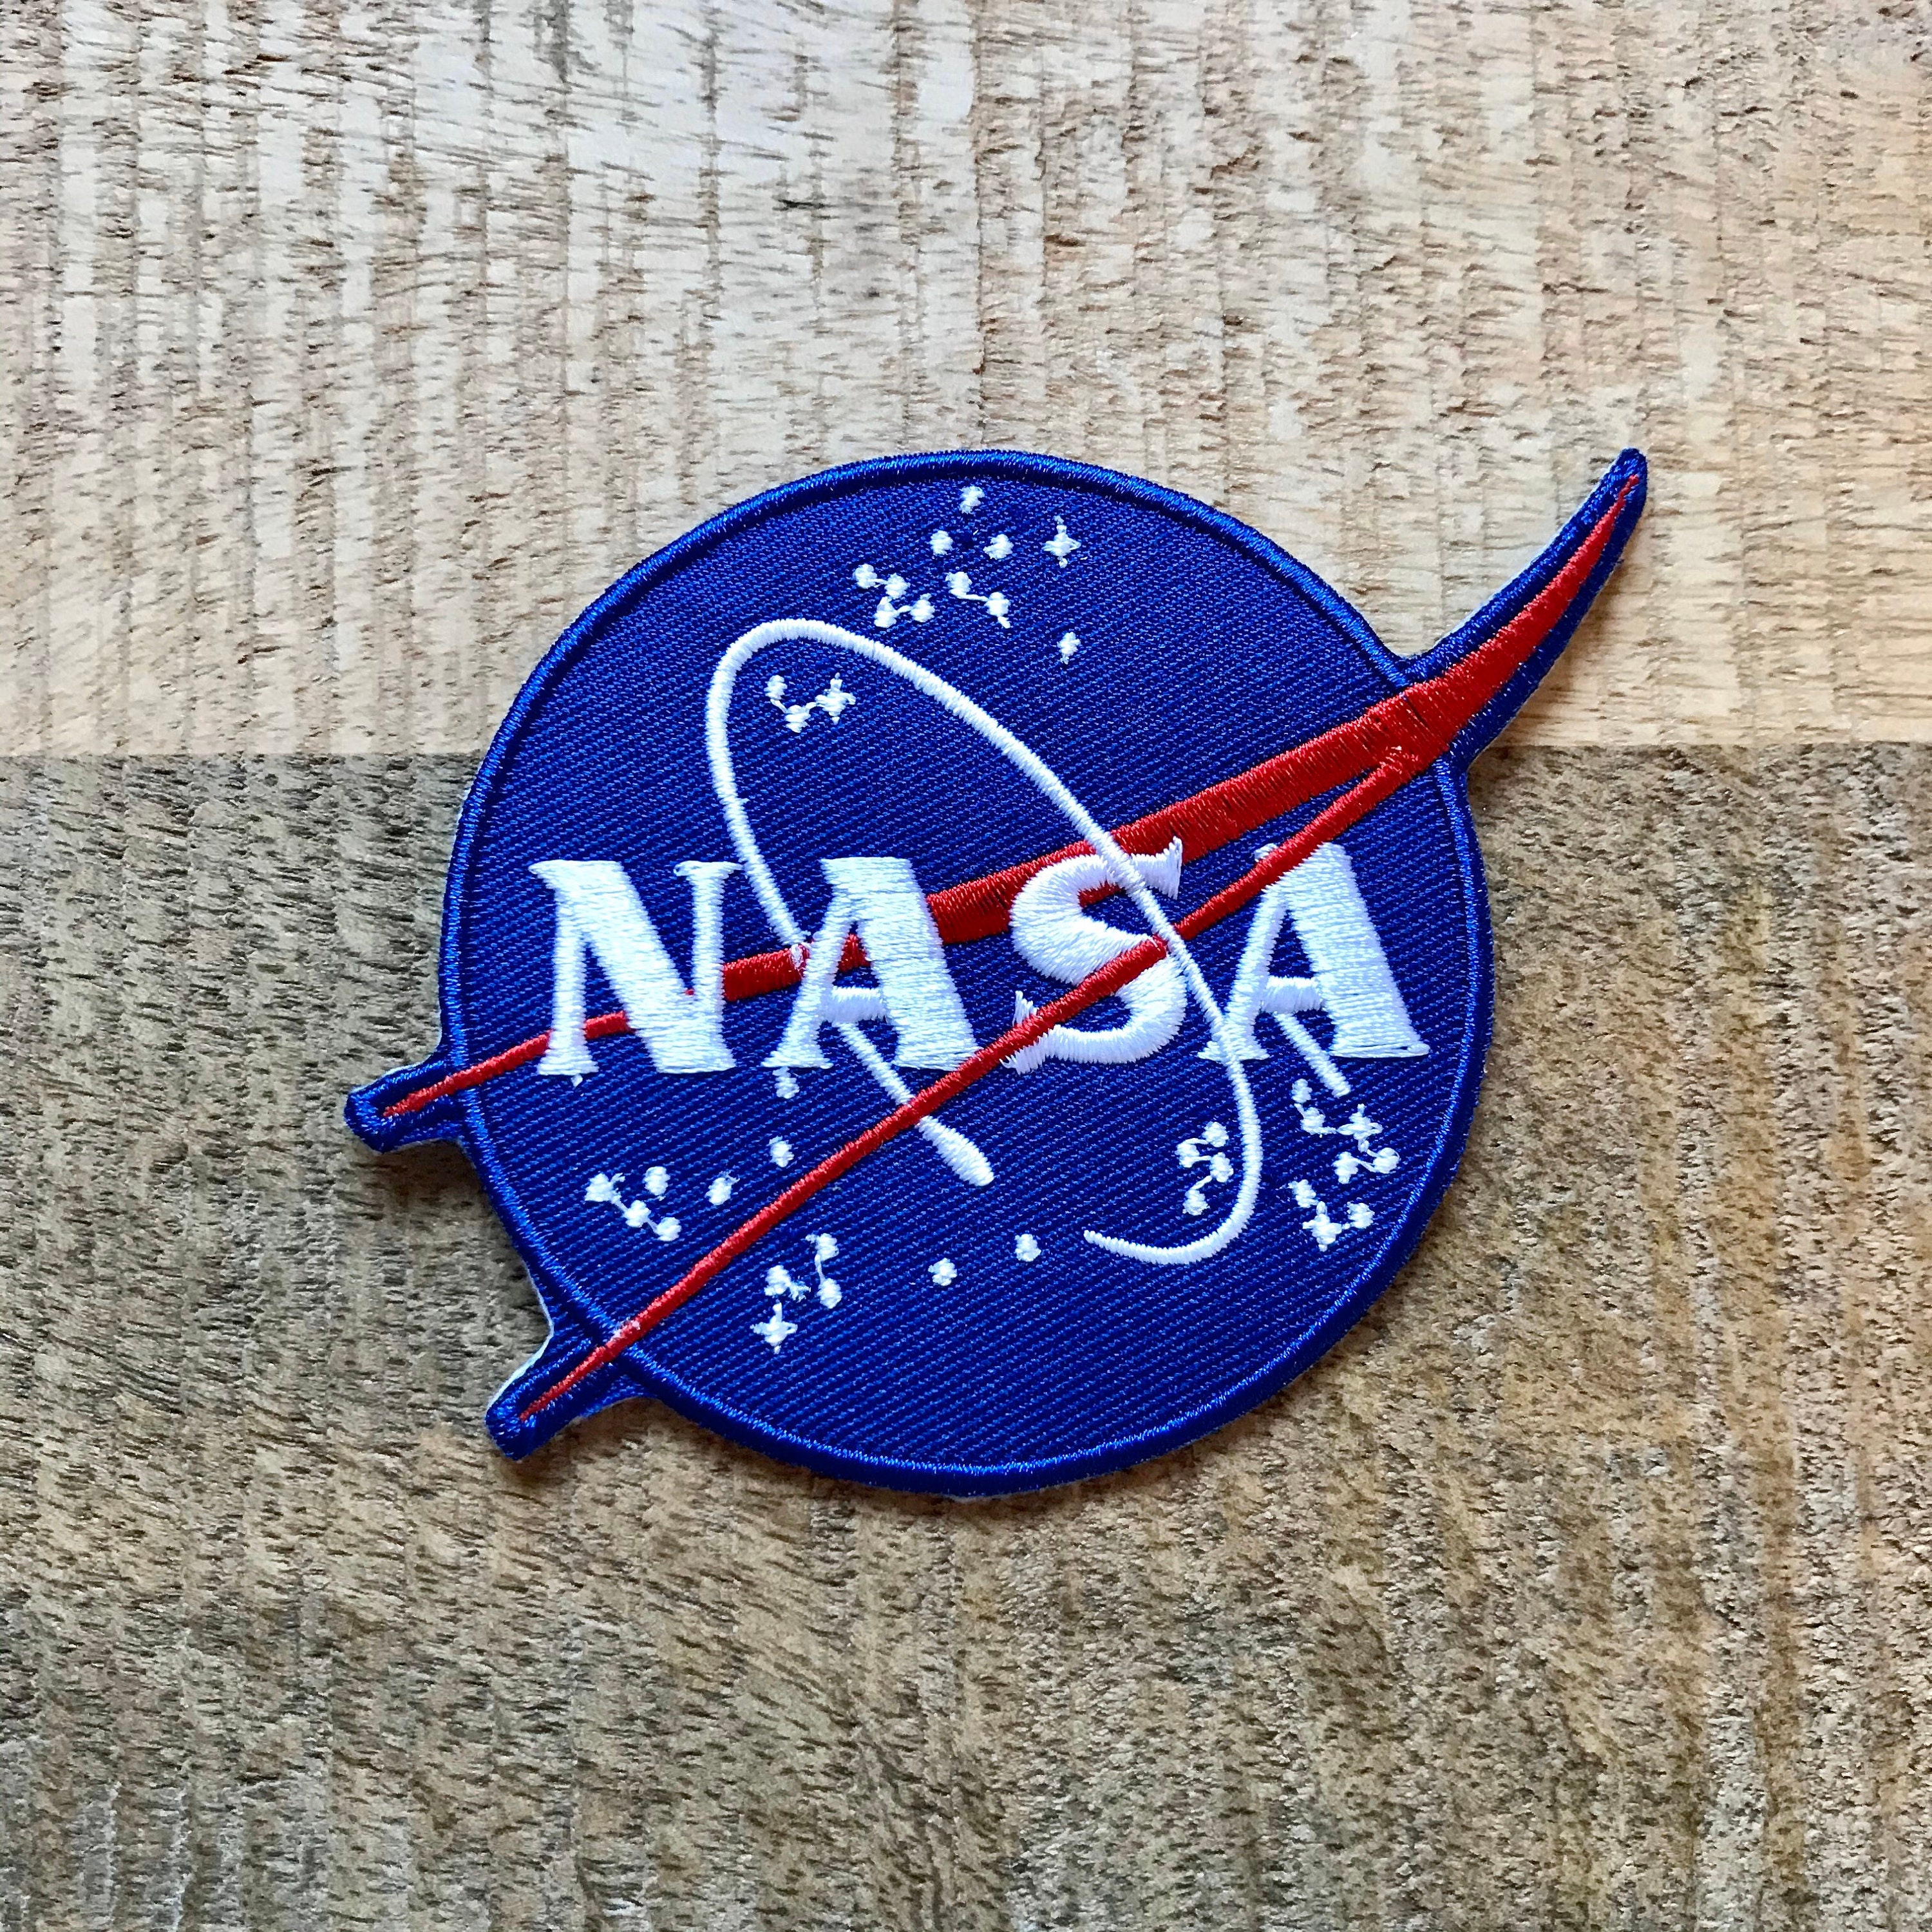 NASA USA Logo Space ship Spaceman Patch Iron On Sew On Patch Badge 